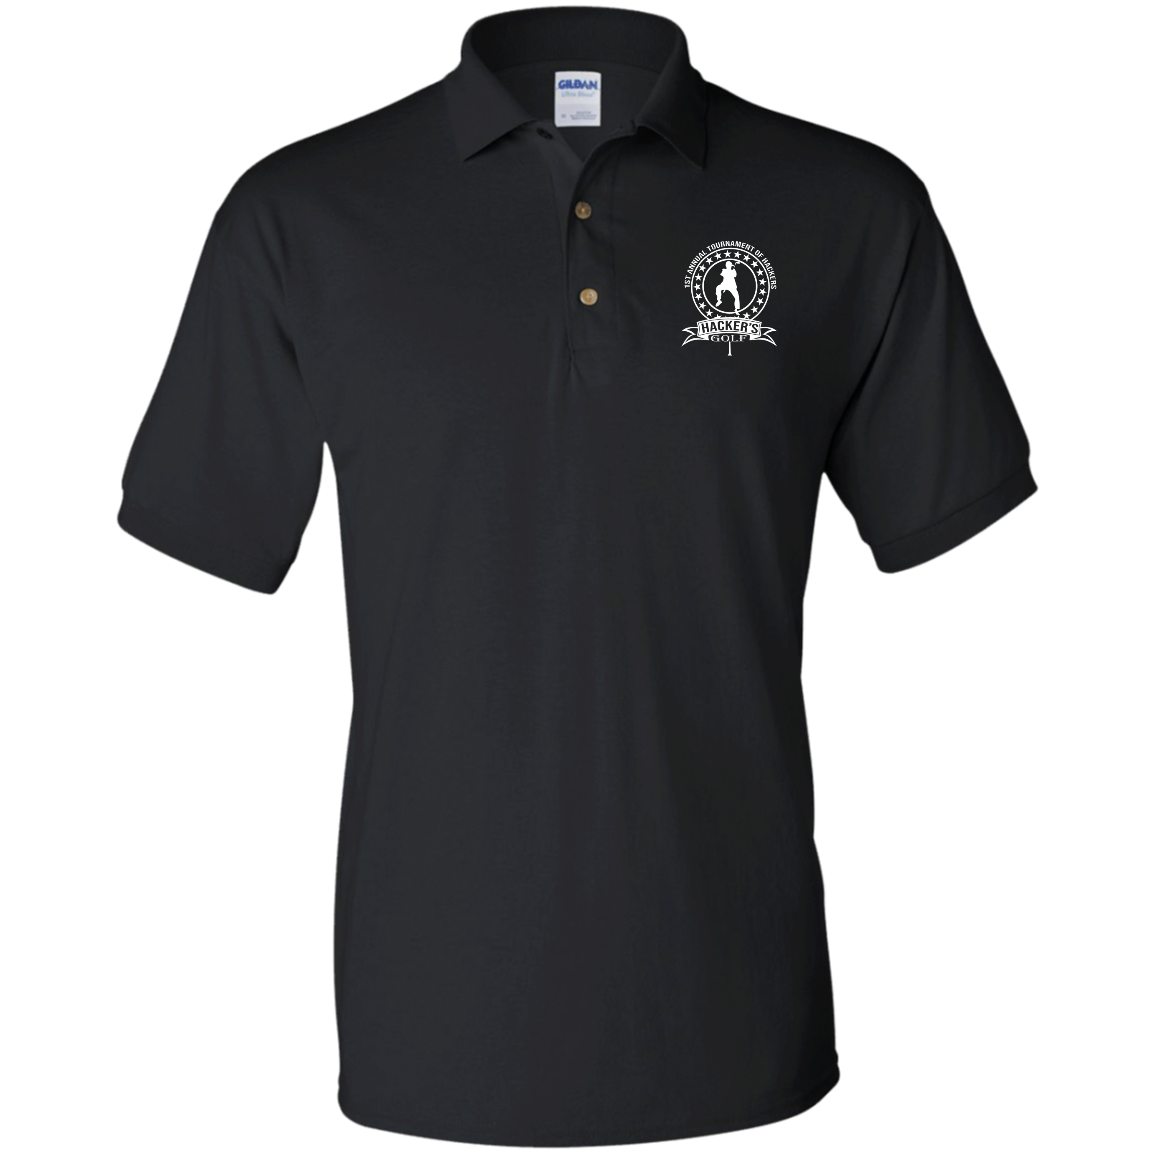 OPG Custom Design #20. 1st Annual Hackers Golf Tournament. Jersey Polo Shirt